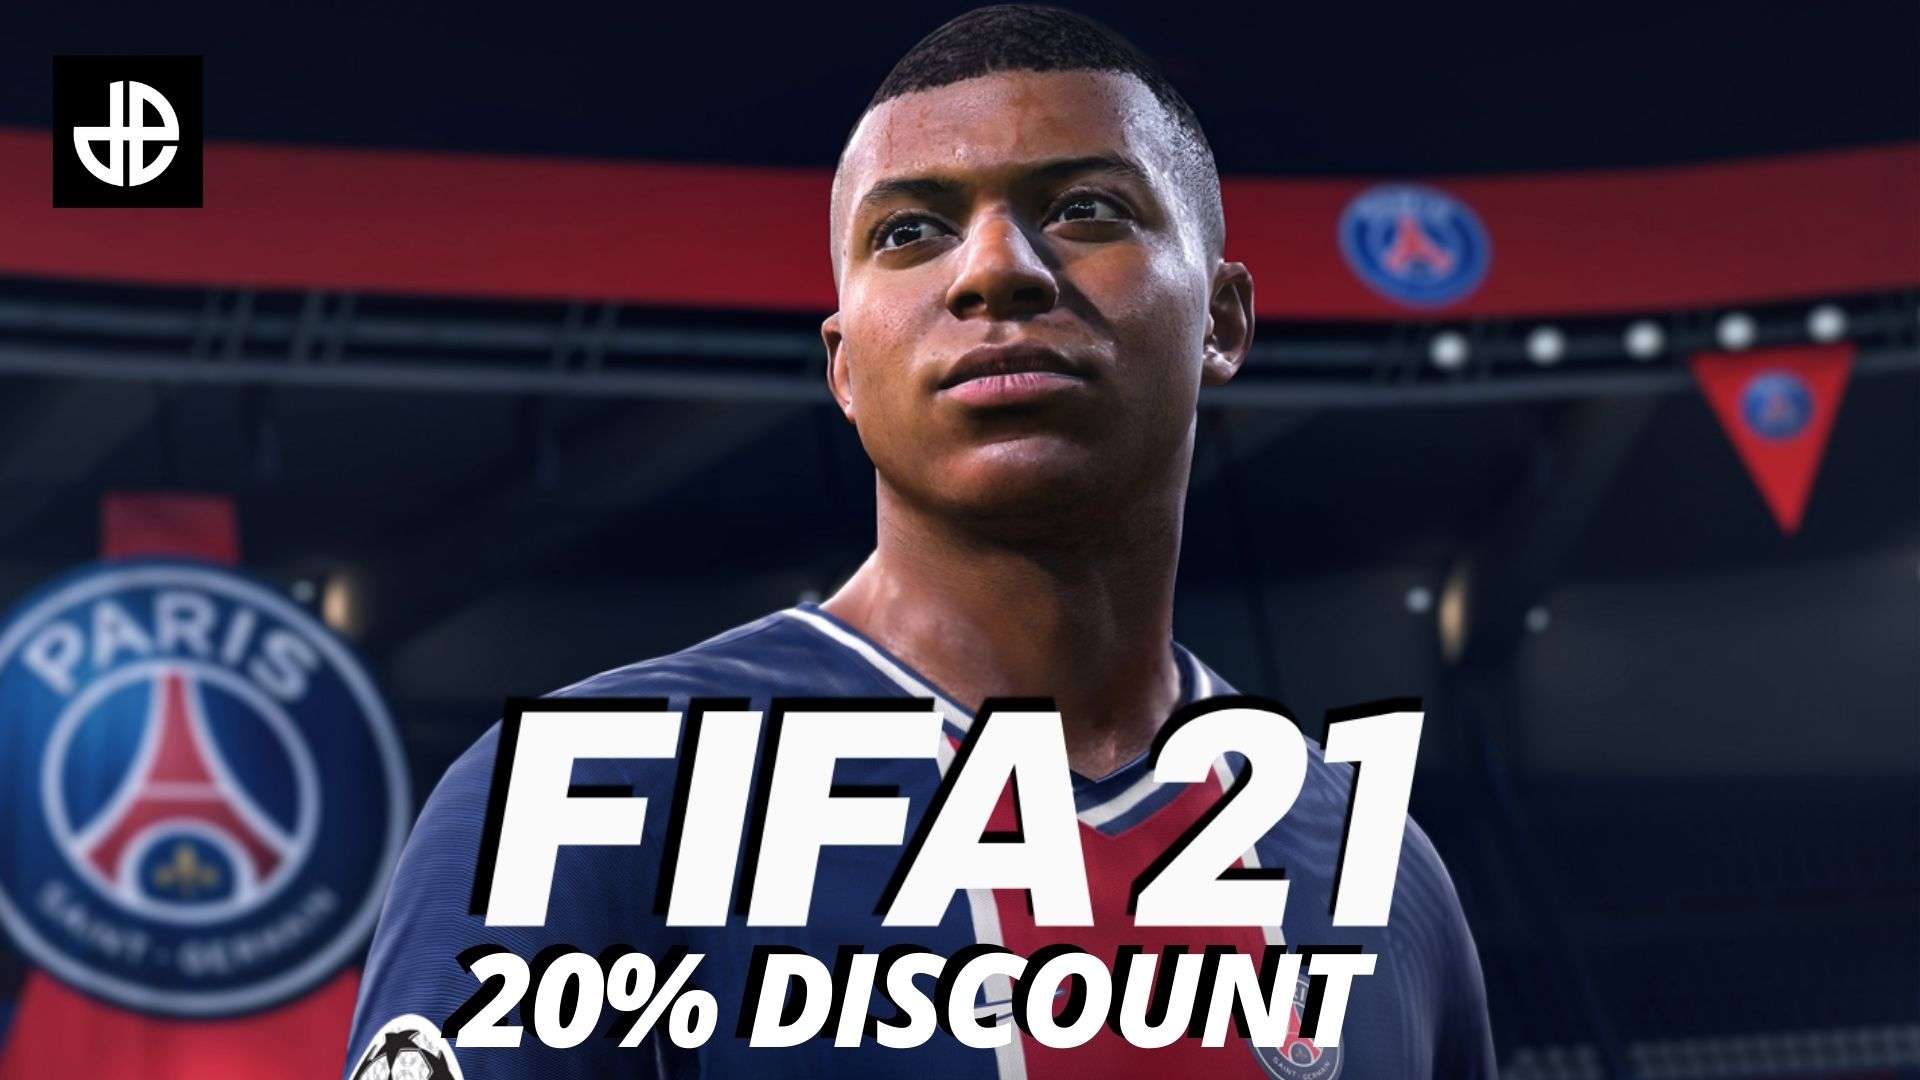 FIFA 21 discount image with Mbappe